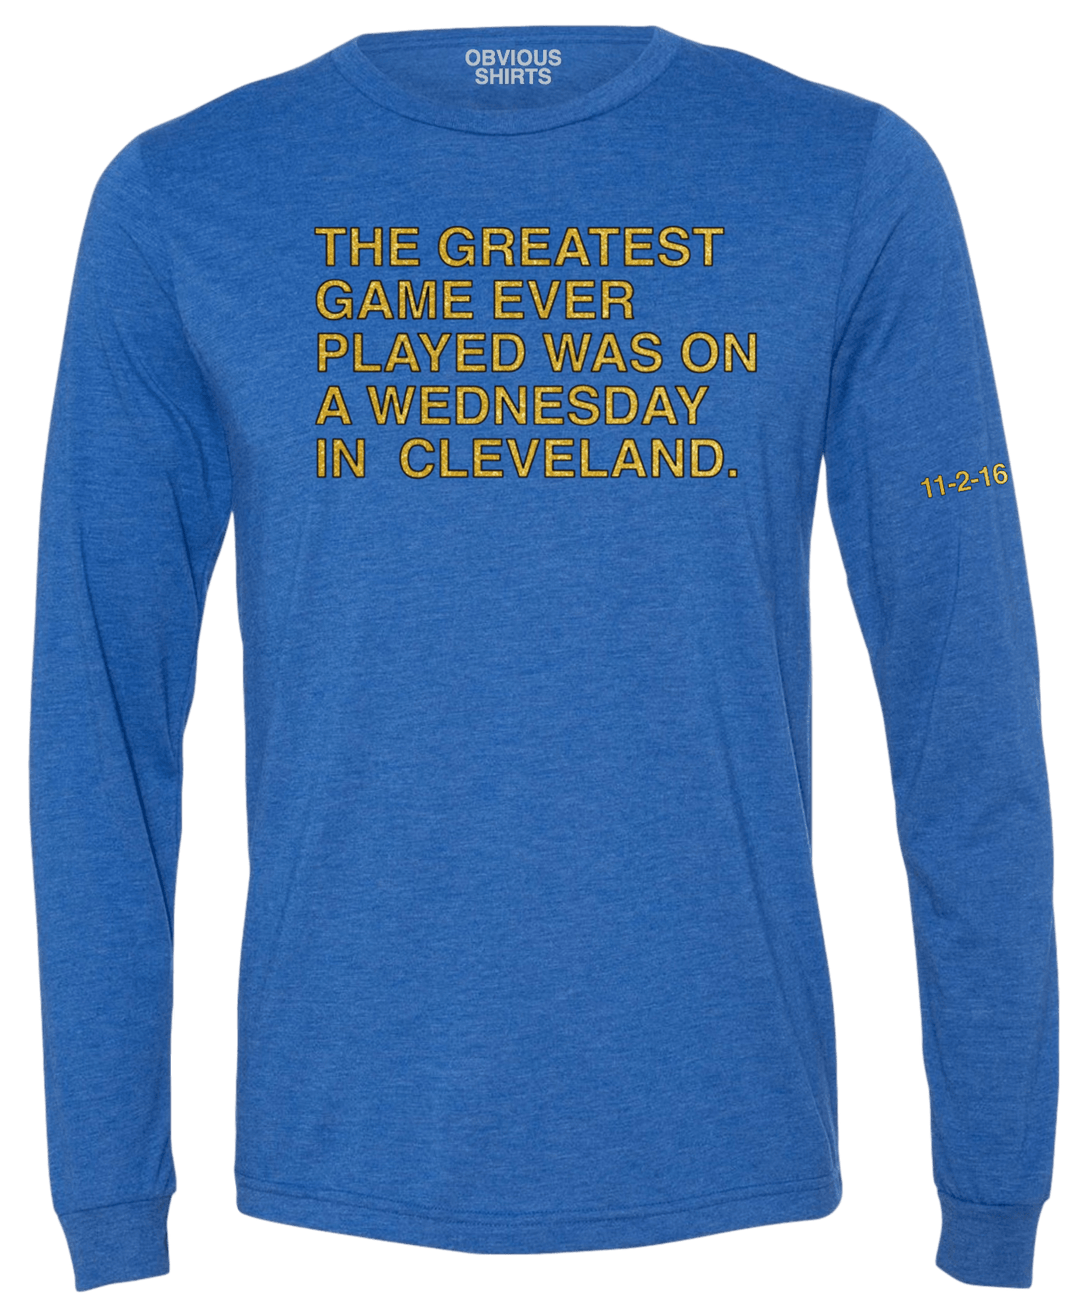 THE GREATEST GAME EVER PLAYED - ANNIVERSARY EDITION (LONG SLEEVE) - OBVIOUS SHIRTS